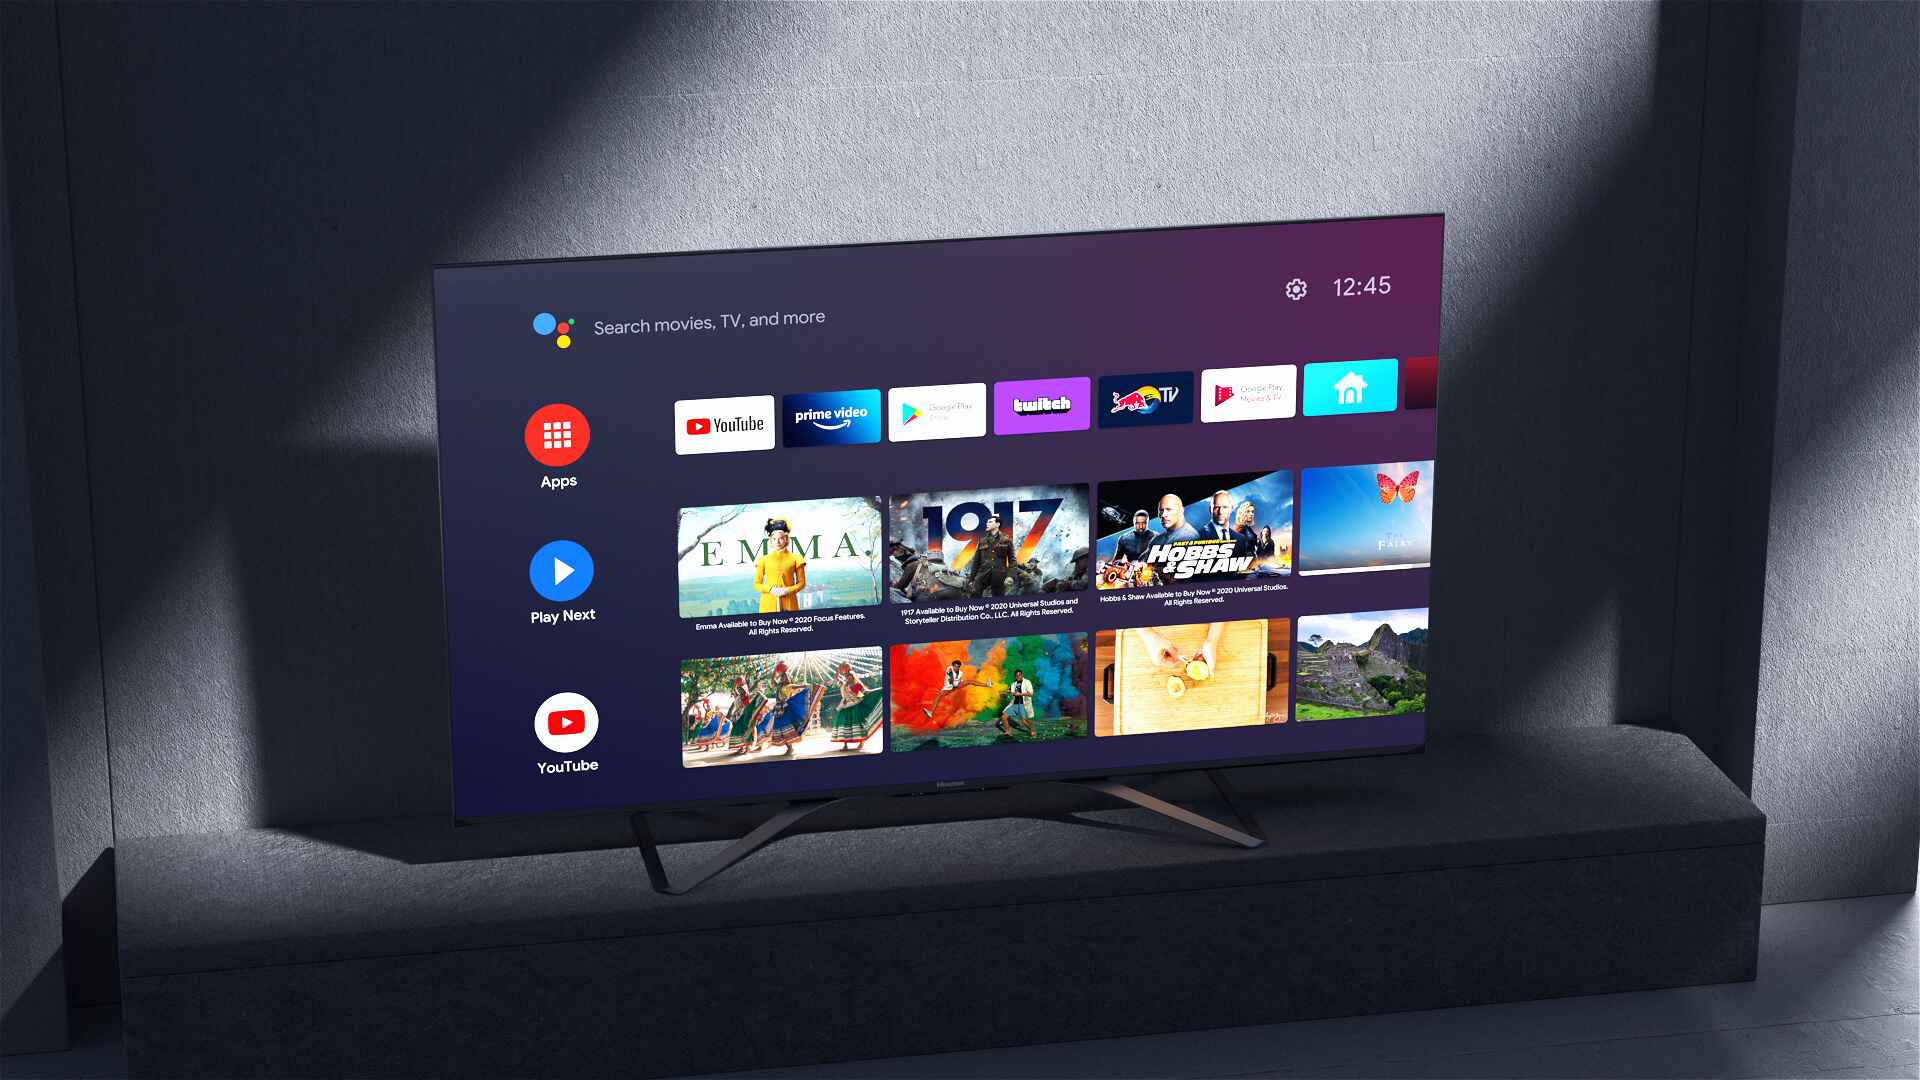 How To Get New Apps On Hisense Smart TV